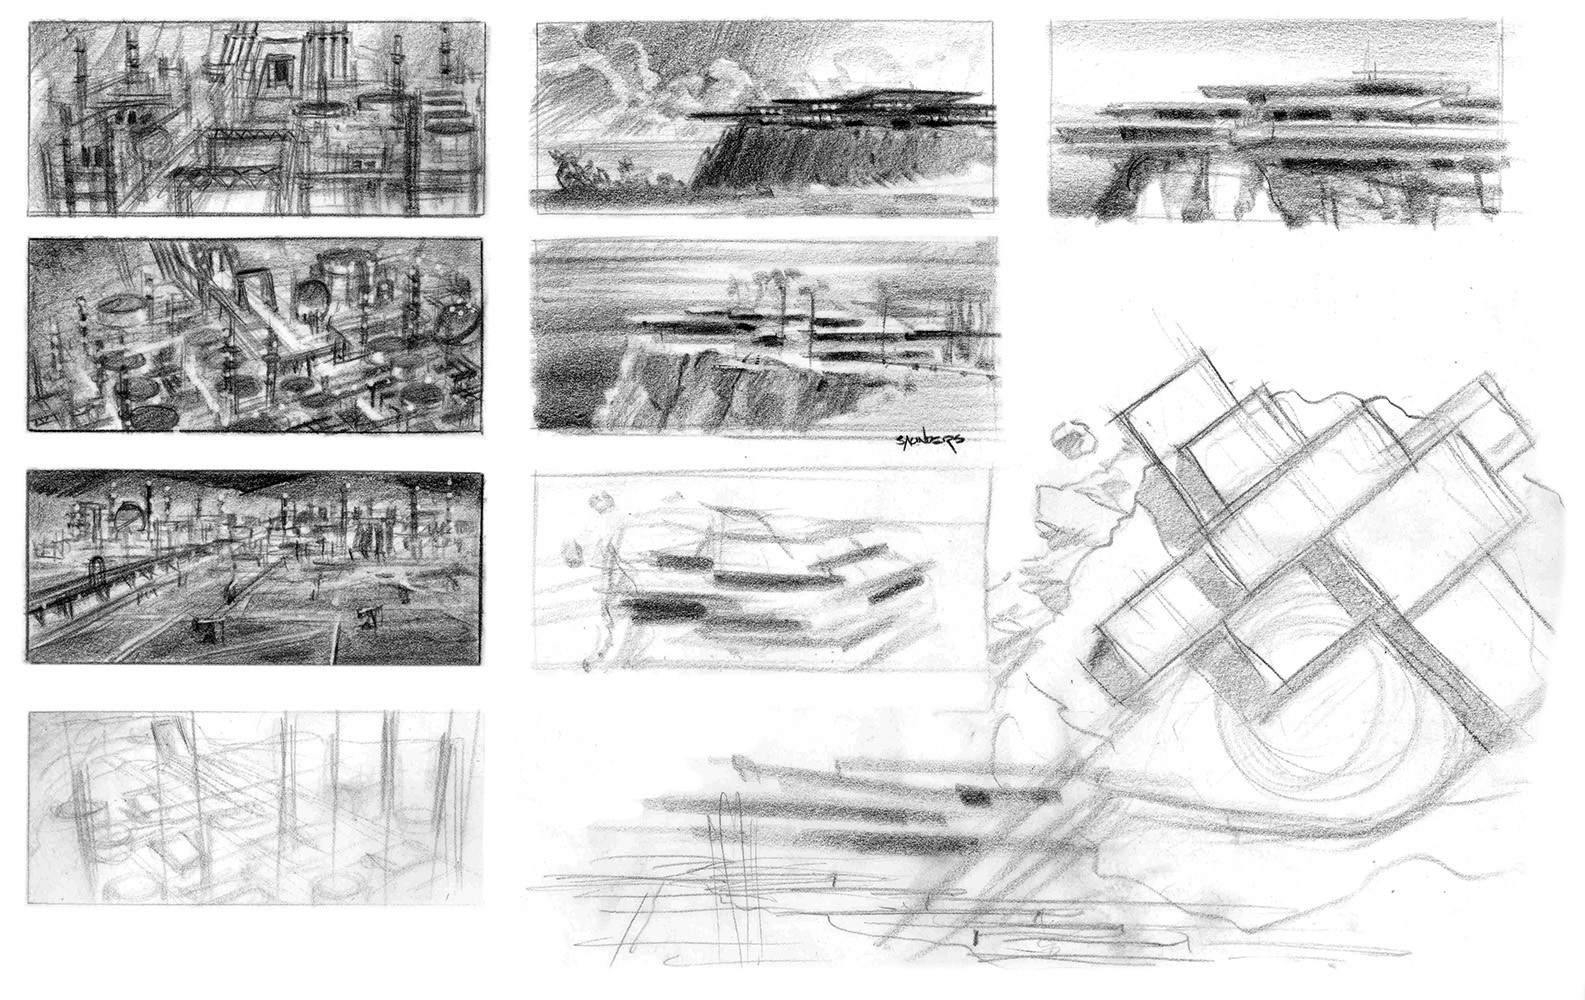 More layout sketches of the house, establishing mood and feel. Note also sketches for the Khan refinery assault scene that was ultimately cut from the climax of the movie.
